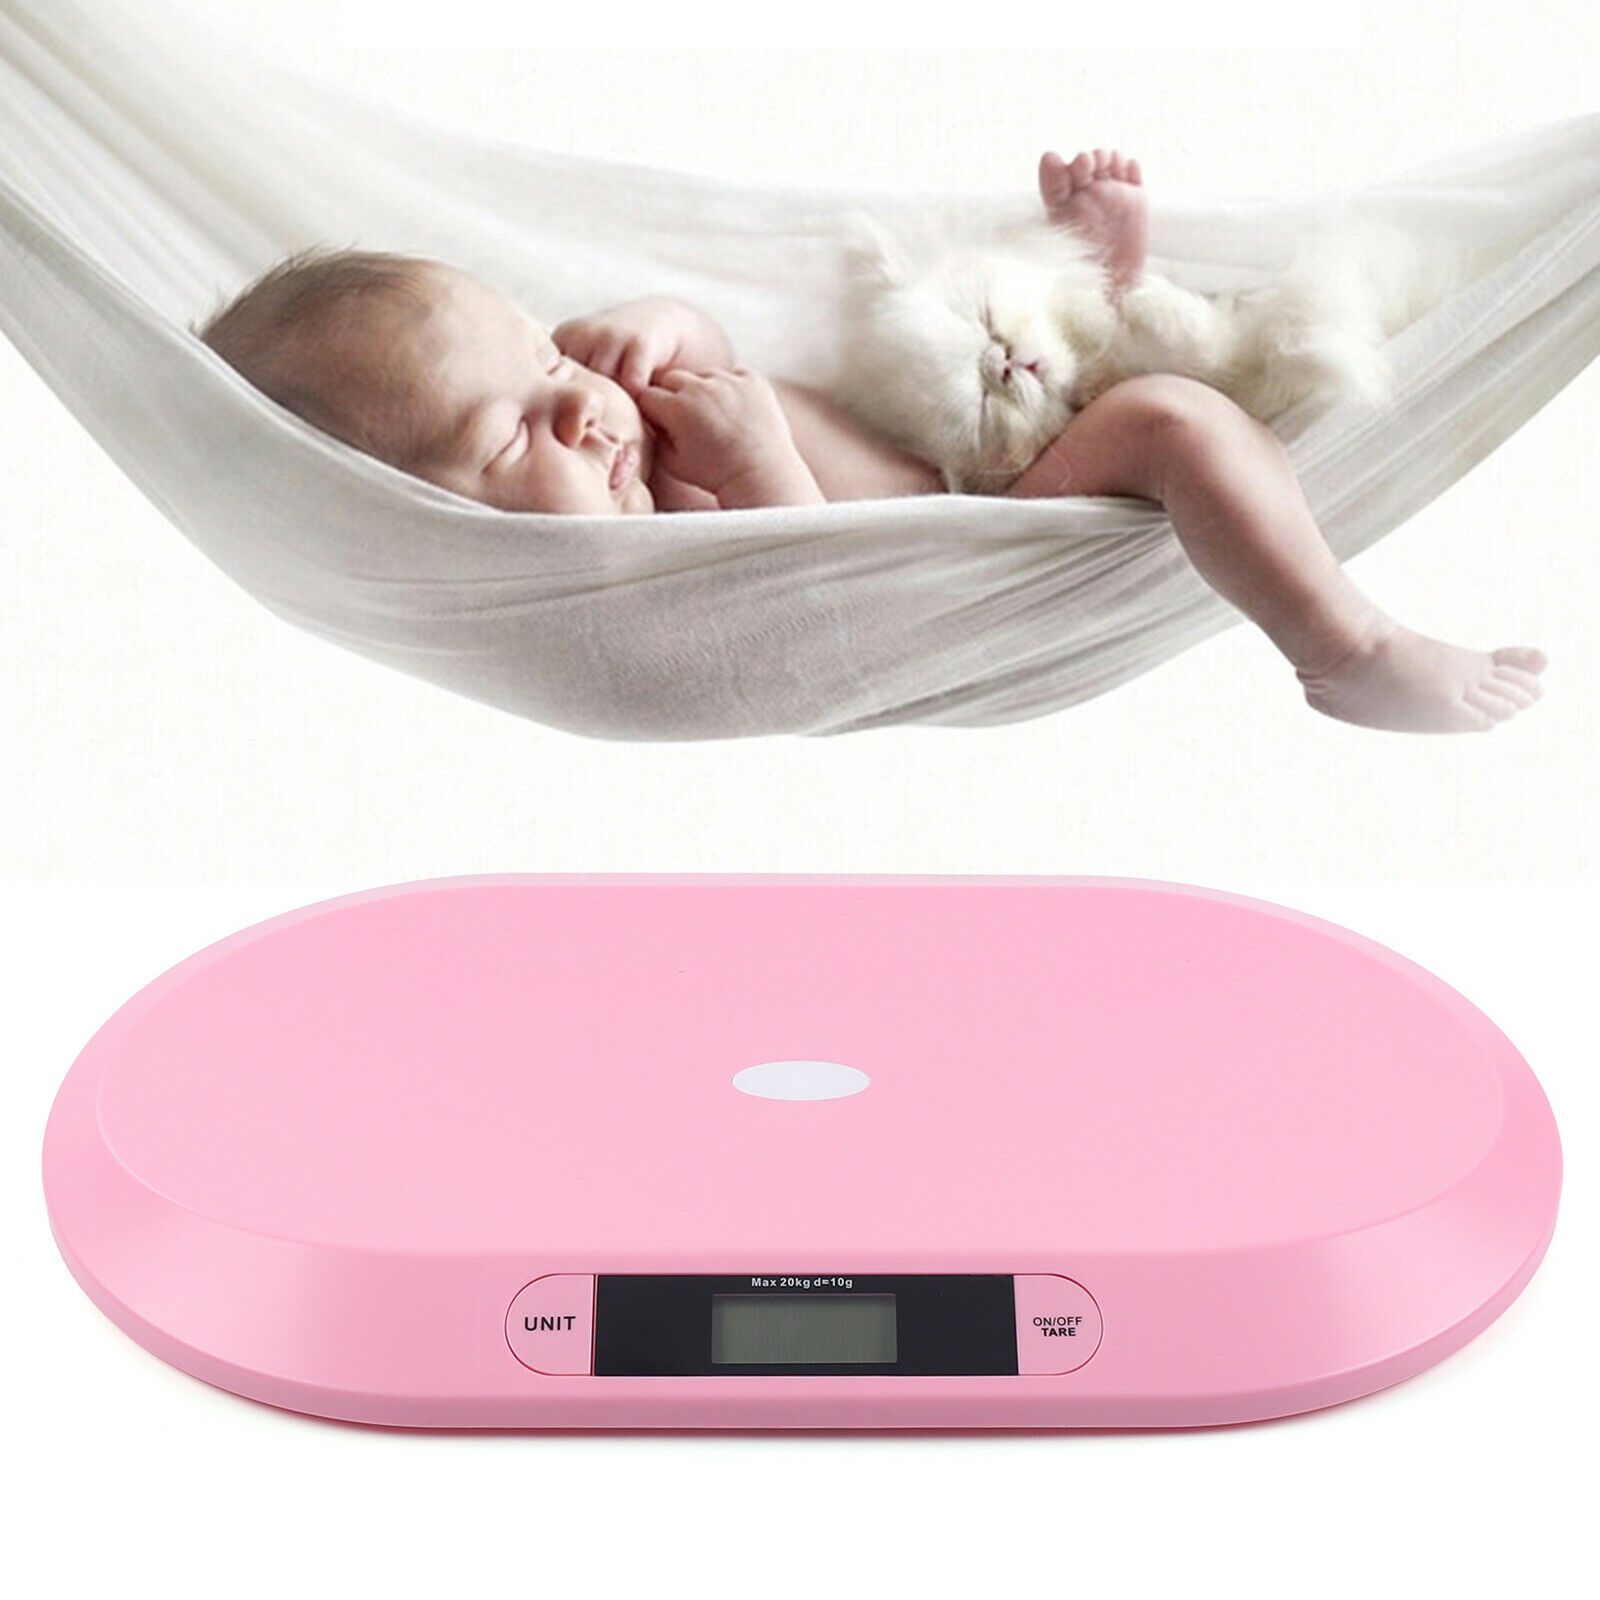 20kg/44lb Digital Baby Scale LCD Electronic Pet Infant Weighing Scale w/ Towel